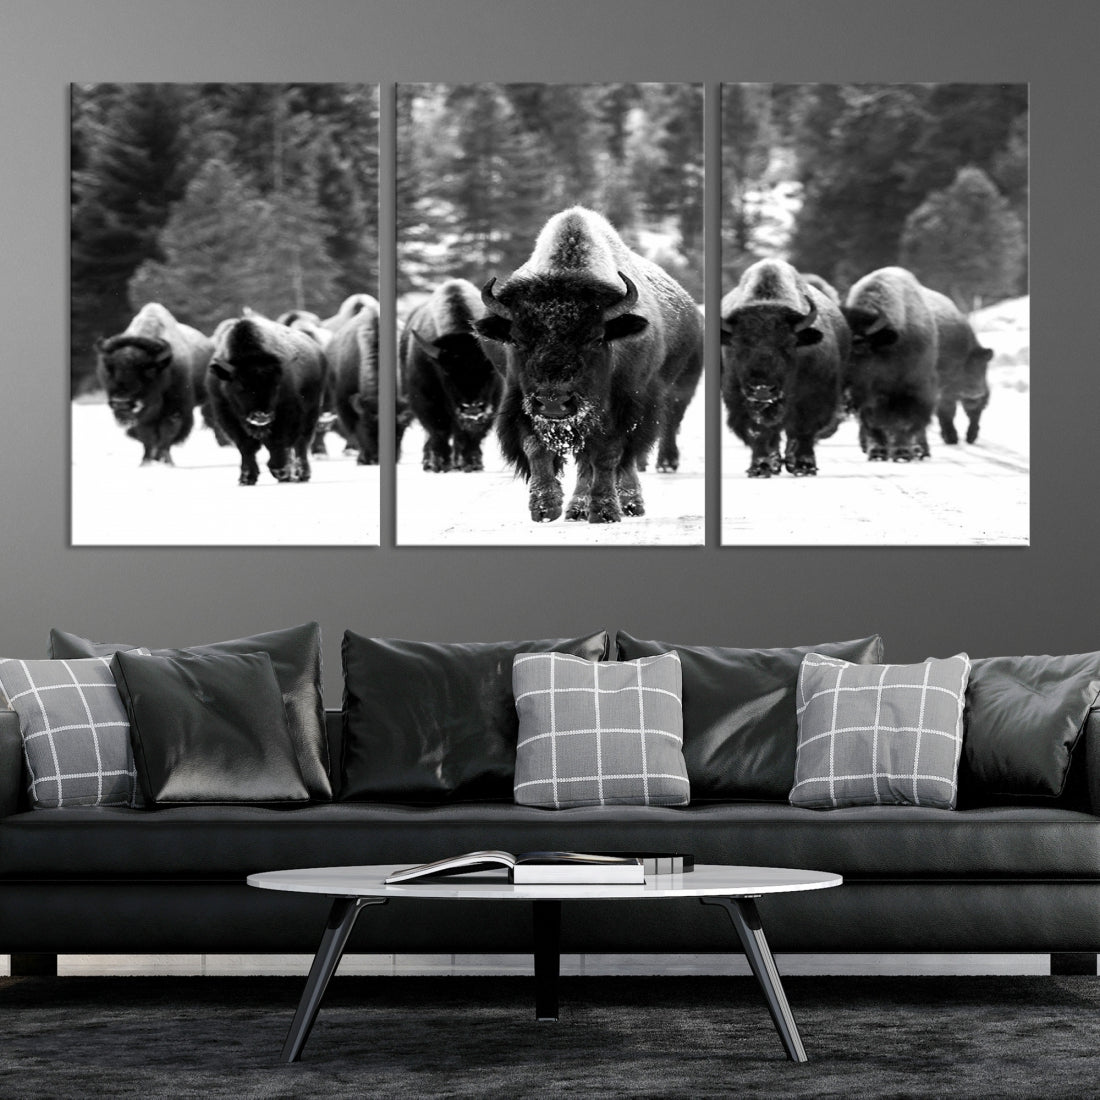 Buffalo Herd Picture Print Extra Large Wall Art Canvas Print Framed Bison Print